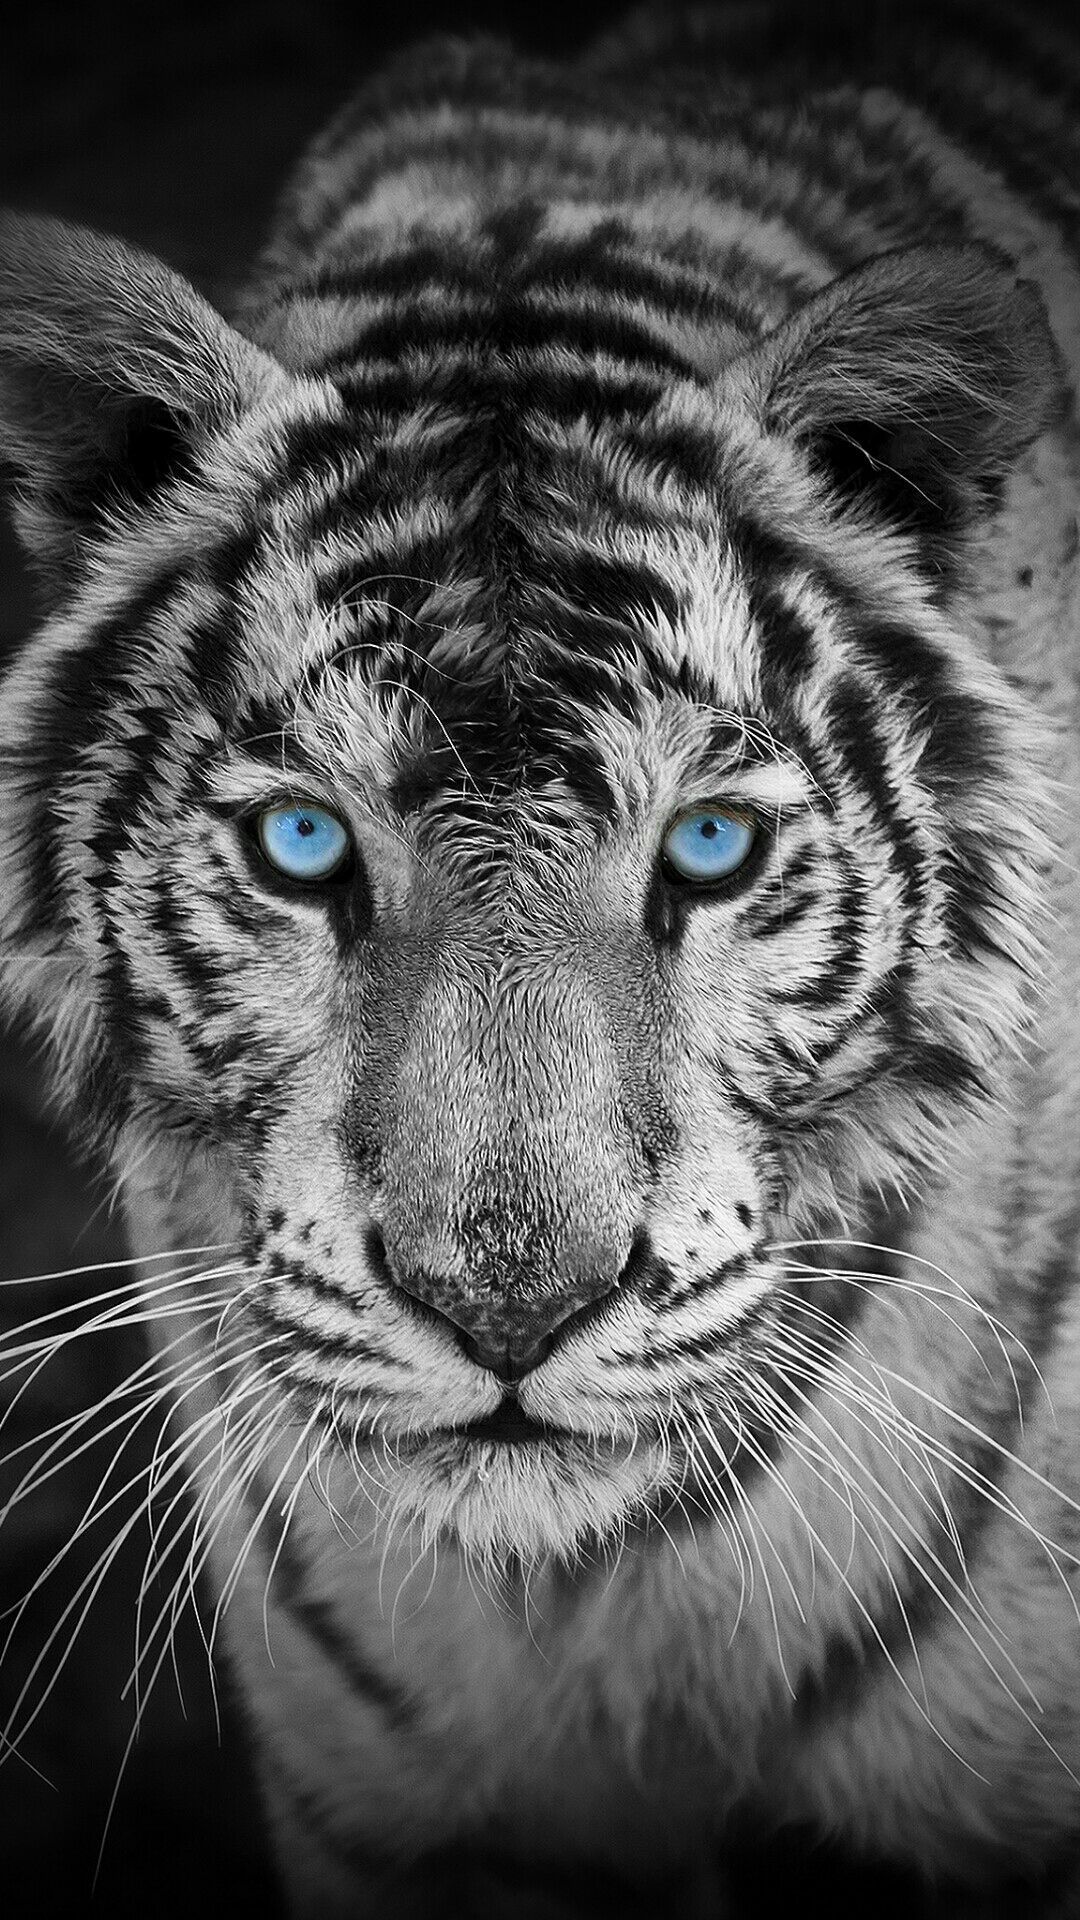 Tiger Background HD Hupages Download iPhone Wallpaper. Wild animal wallpaper, Animal wallpaper, Animals wild